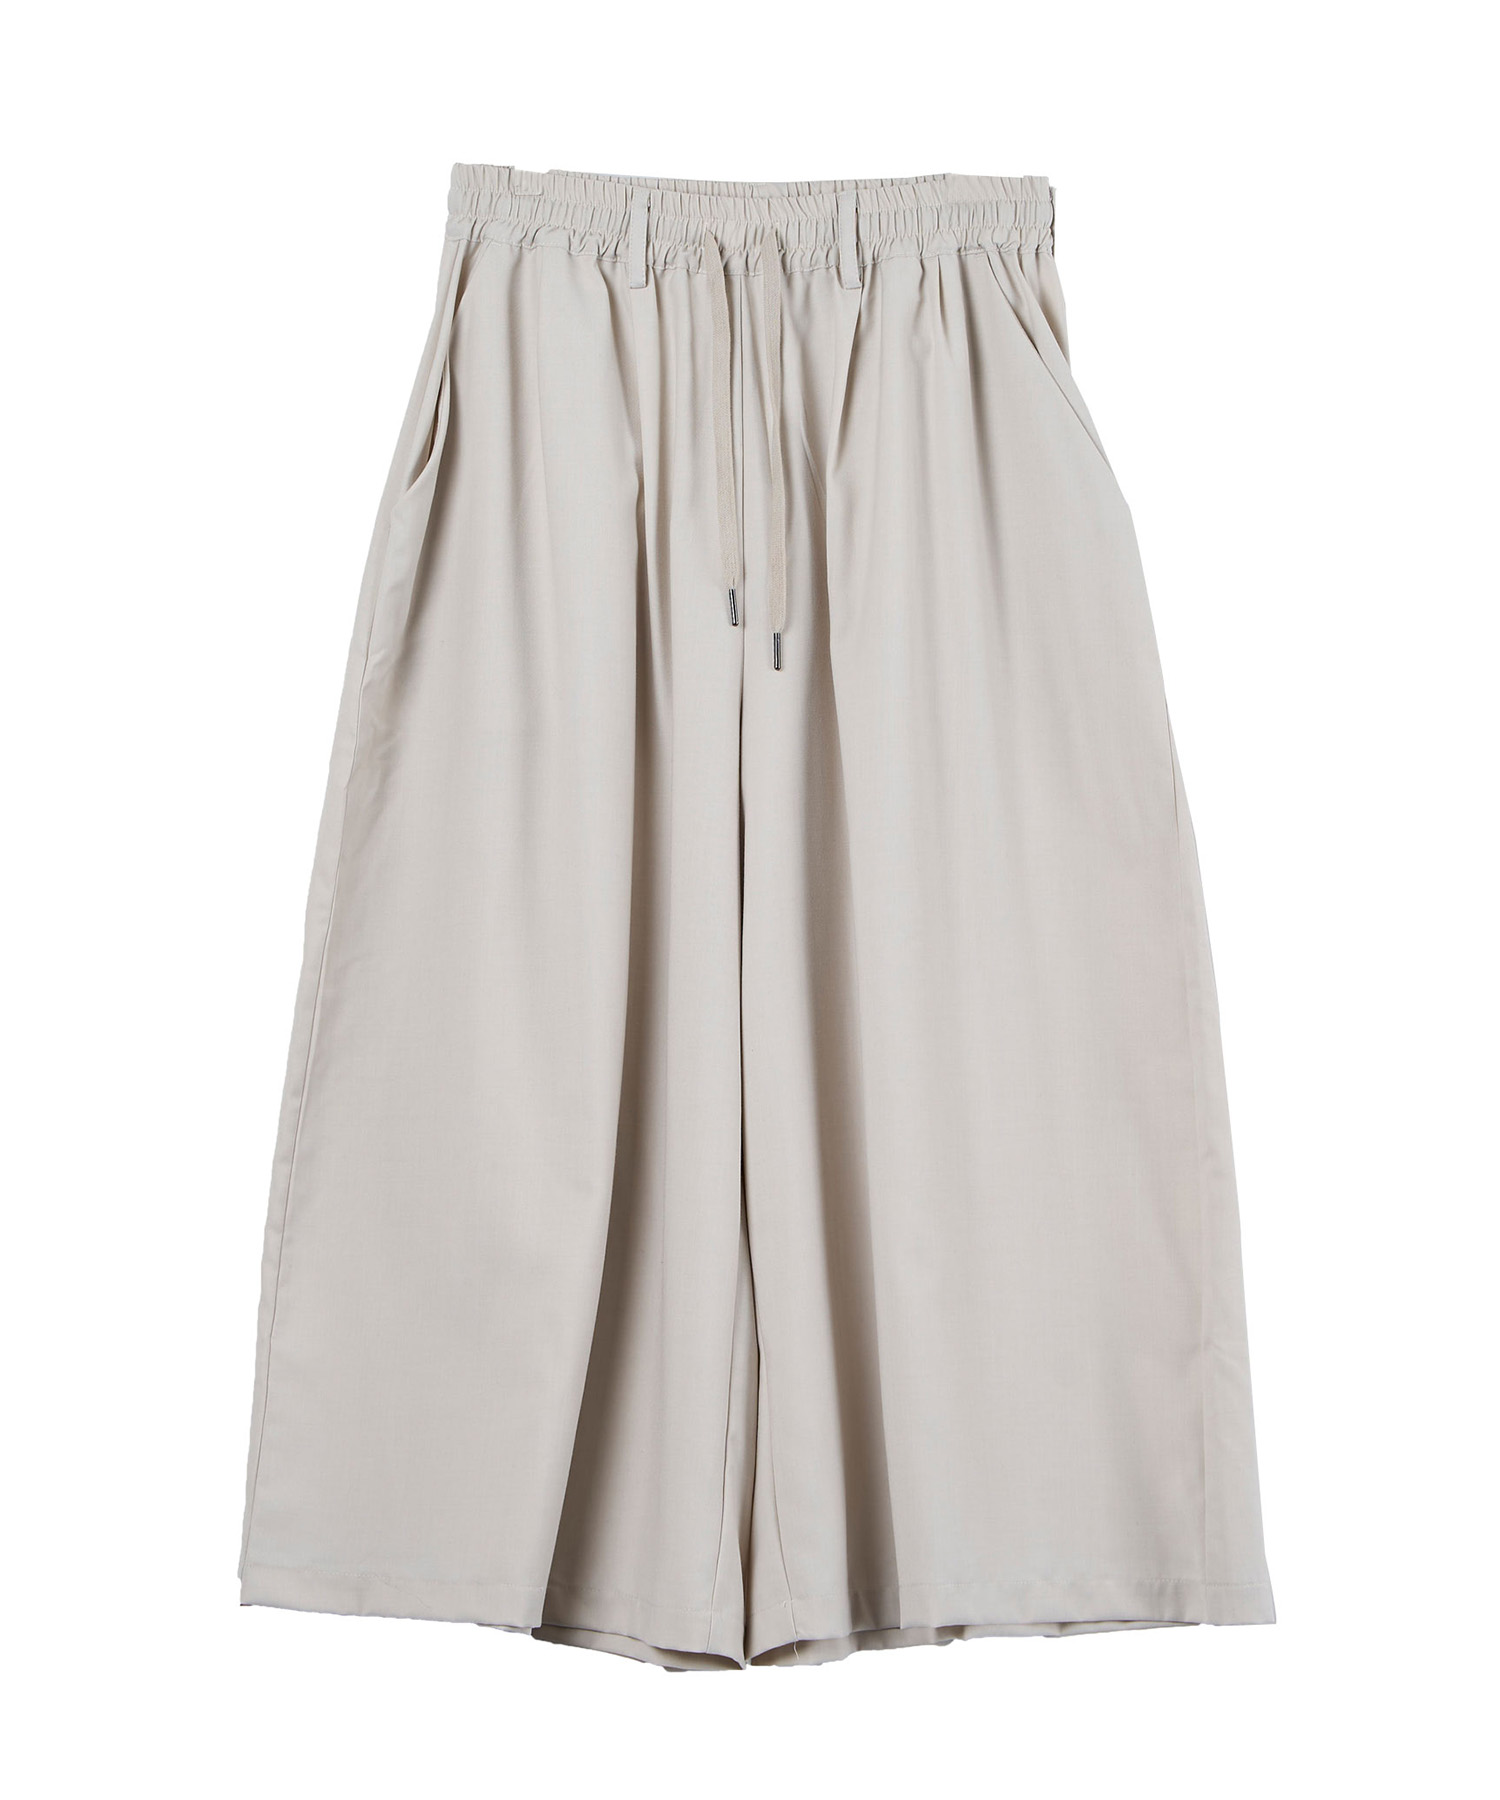 T/R hakama pant / NOT CONVENTIONAL公式通販